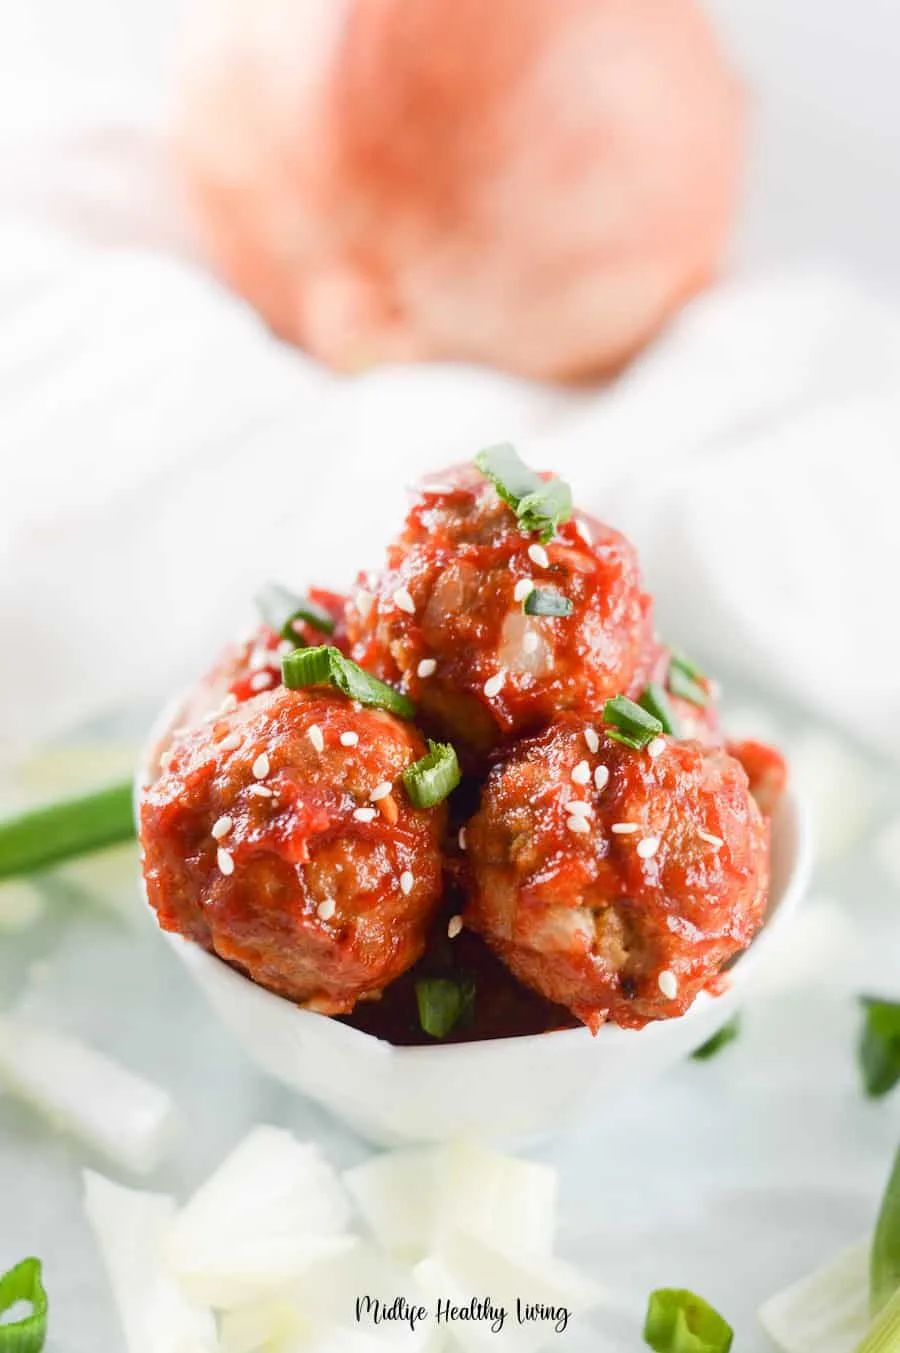 A look at the completed recipe for WW meatballs with delicious glaze. 